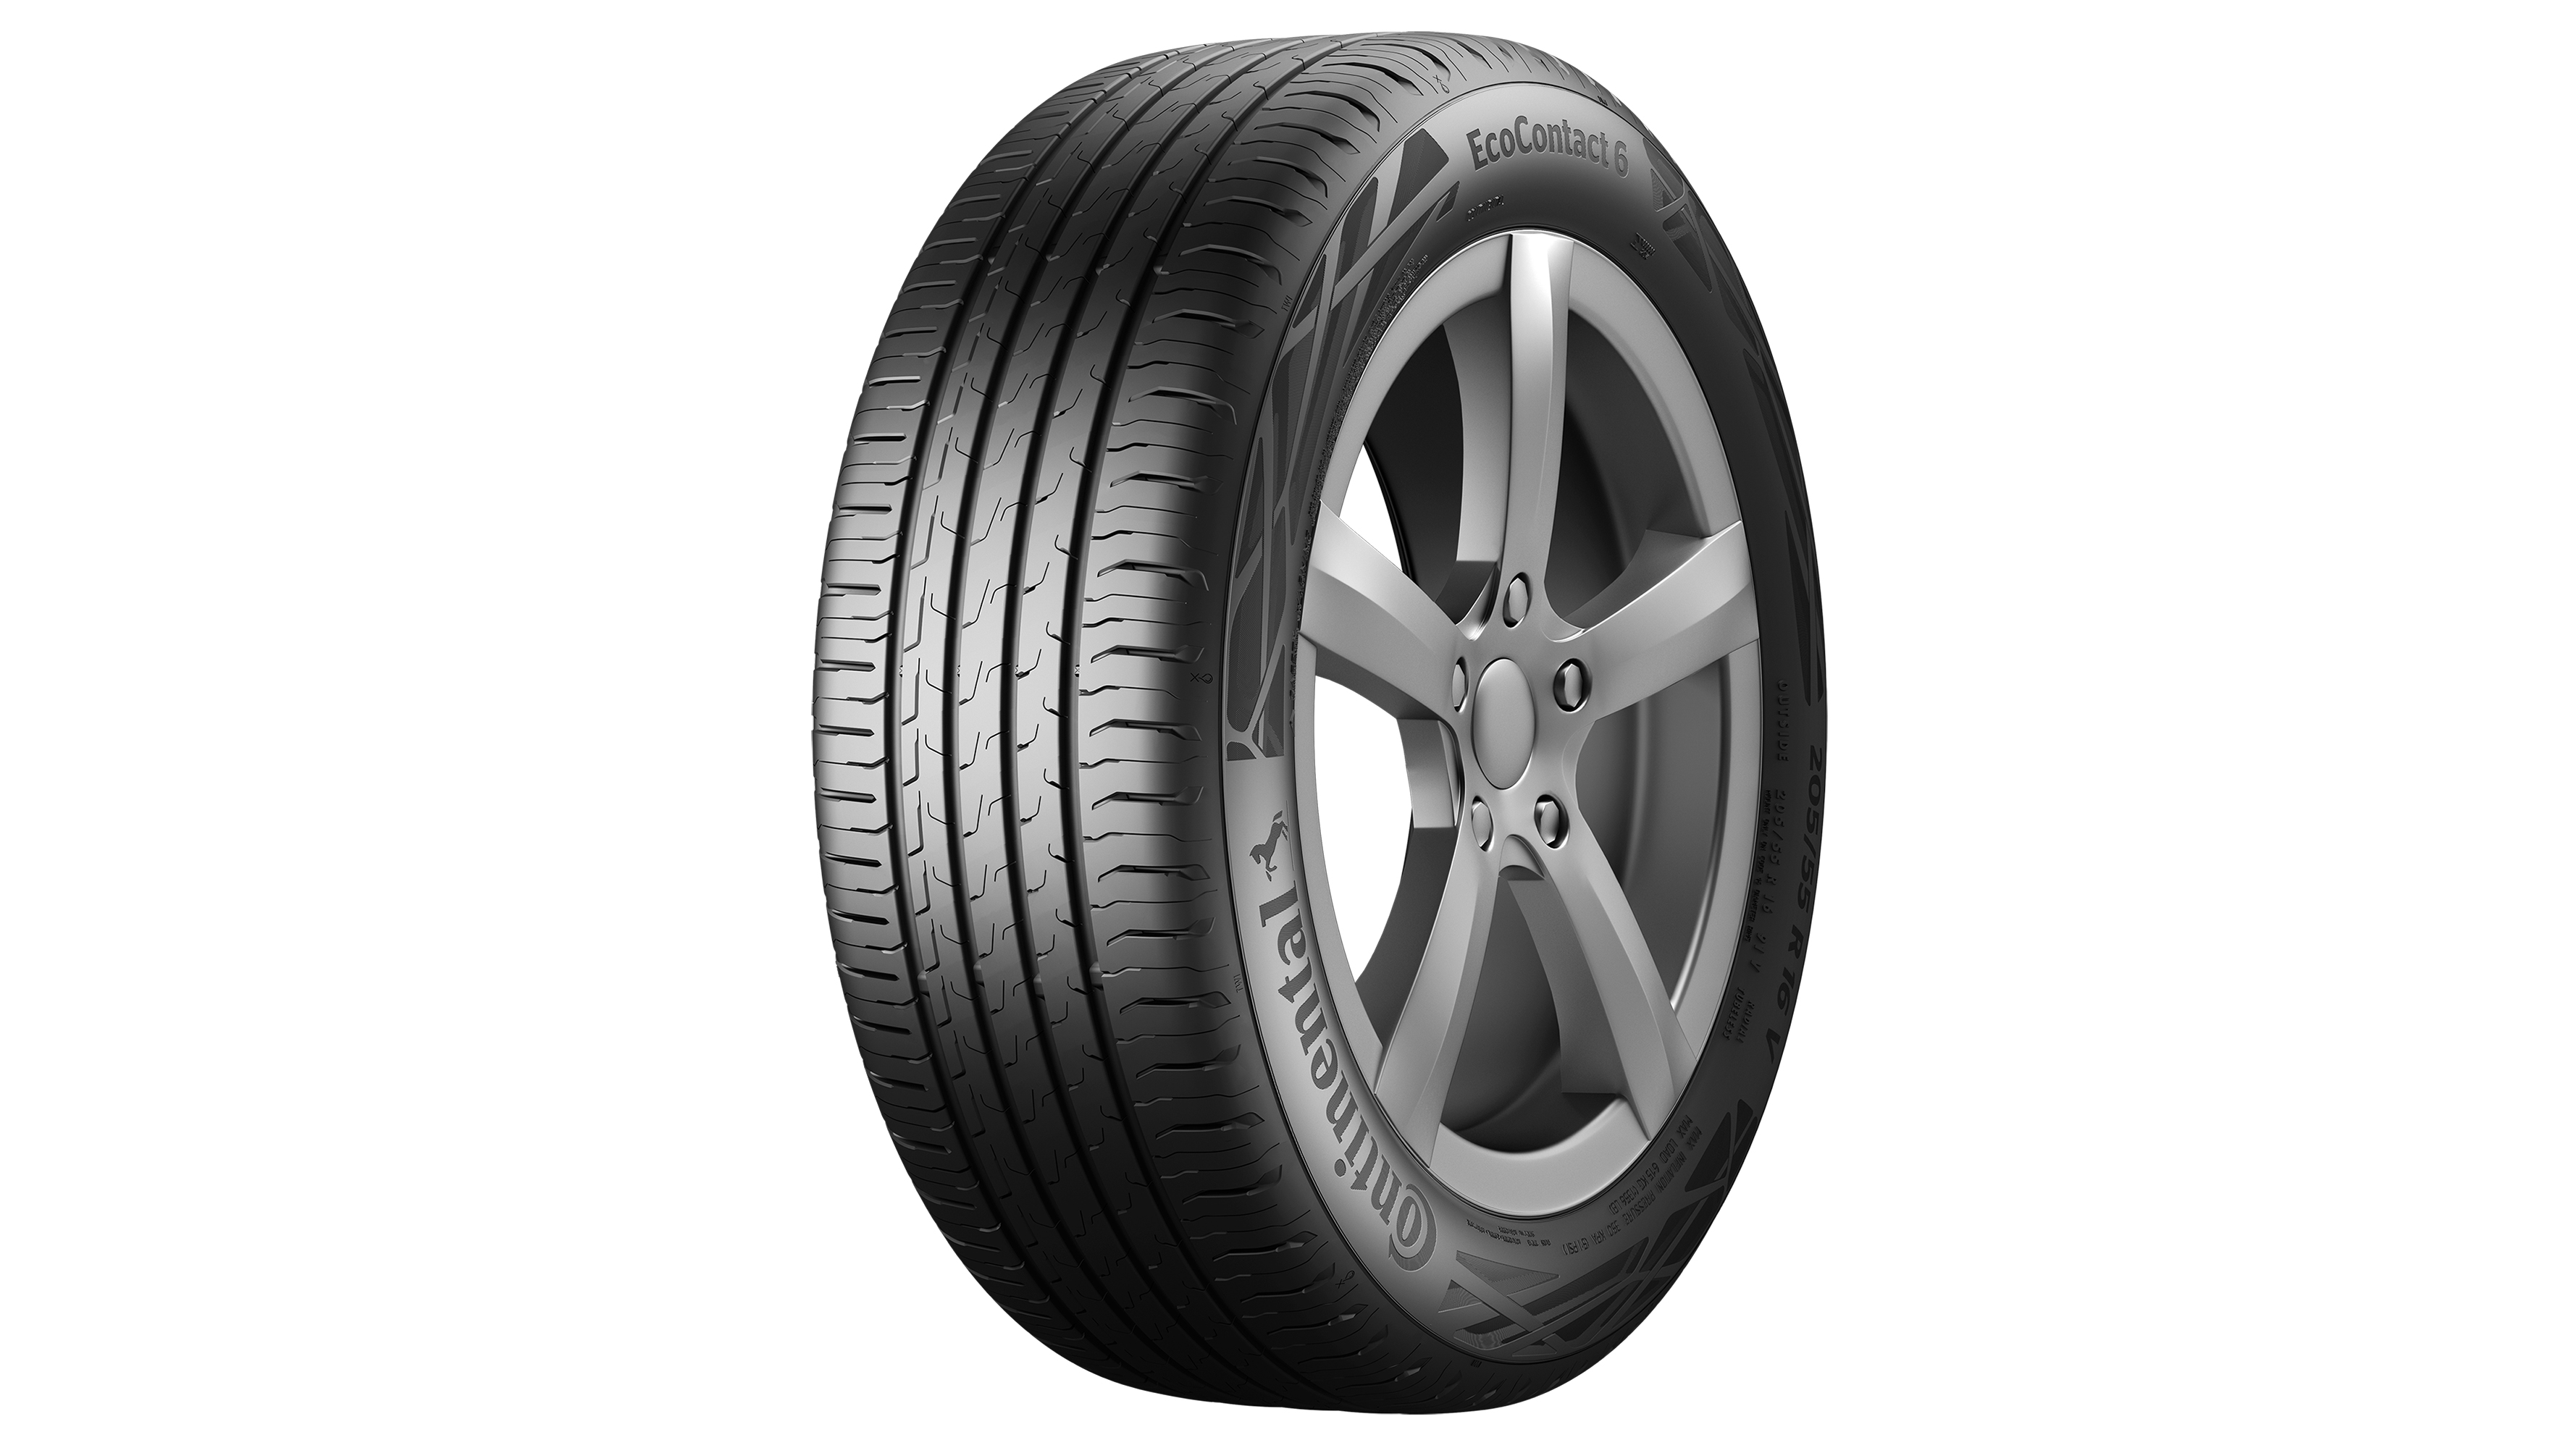 Mercedes C-Class AG - PremiumContact Continental\'s Factory-Fitted Tires EcoContact with 6 Continental and 6